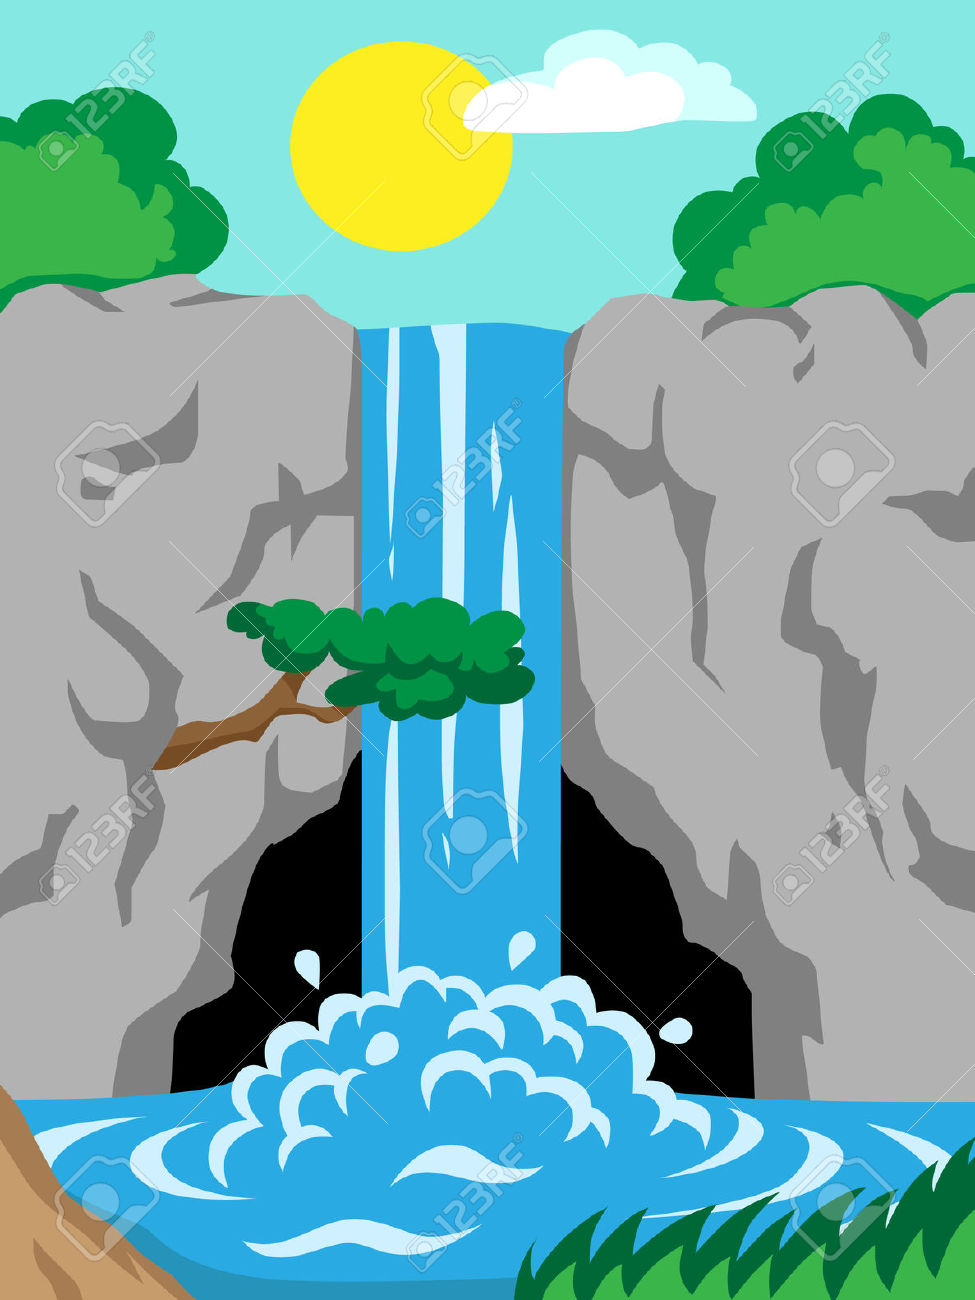 Waterfall Clipart & Waterfall Clip Art Images.